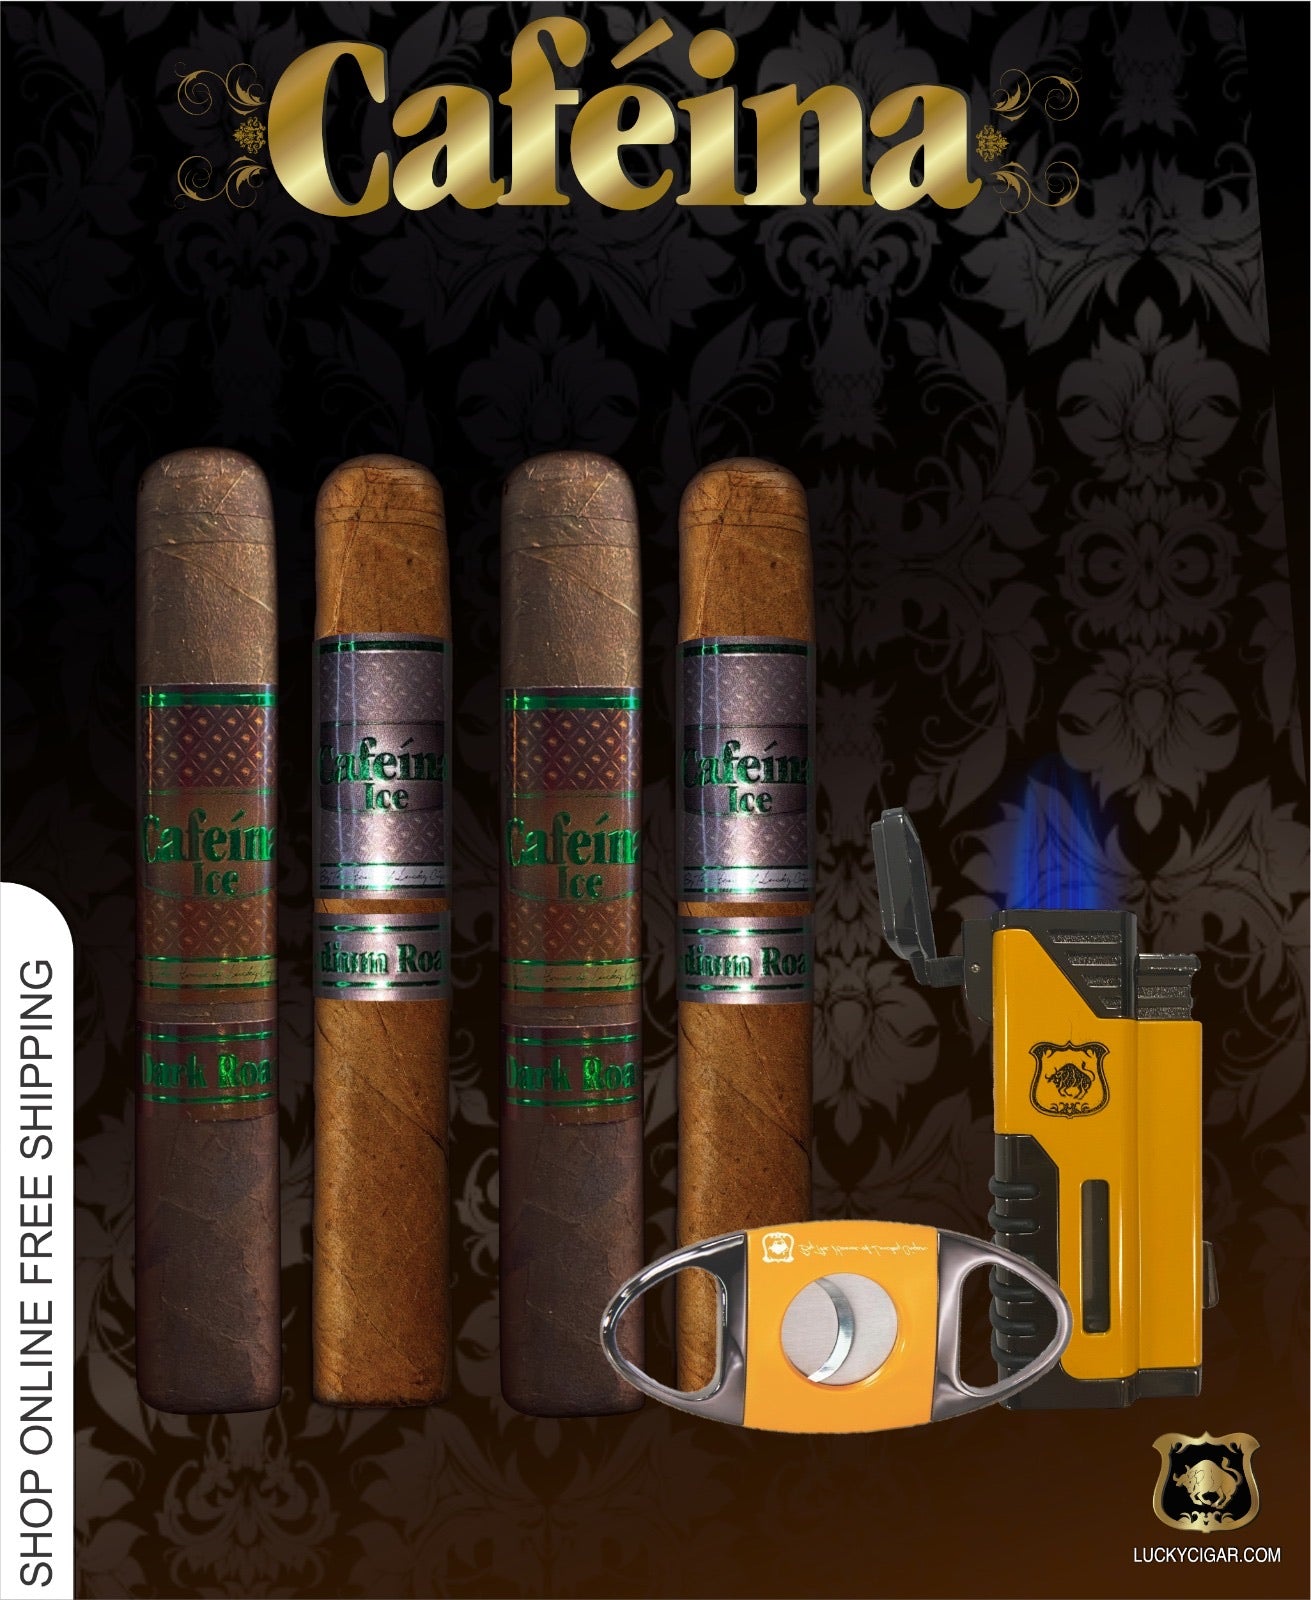 Infused Cigars: Set of 4 Cafeina Ice Roast Cigars - 2 Medium, 2 Dark 6x52 Cigars with Cutter, Torch